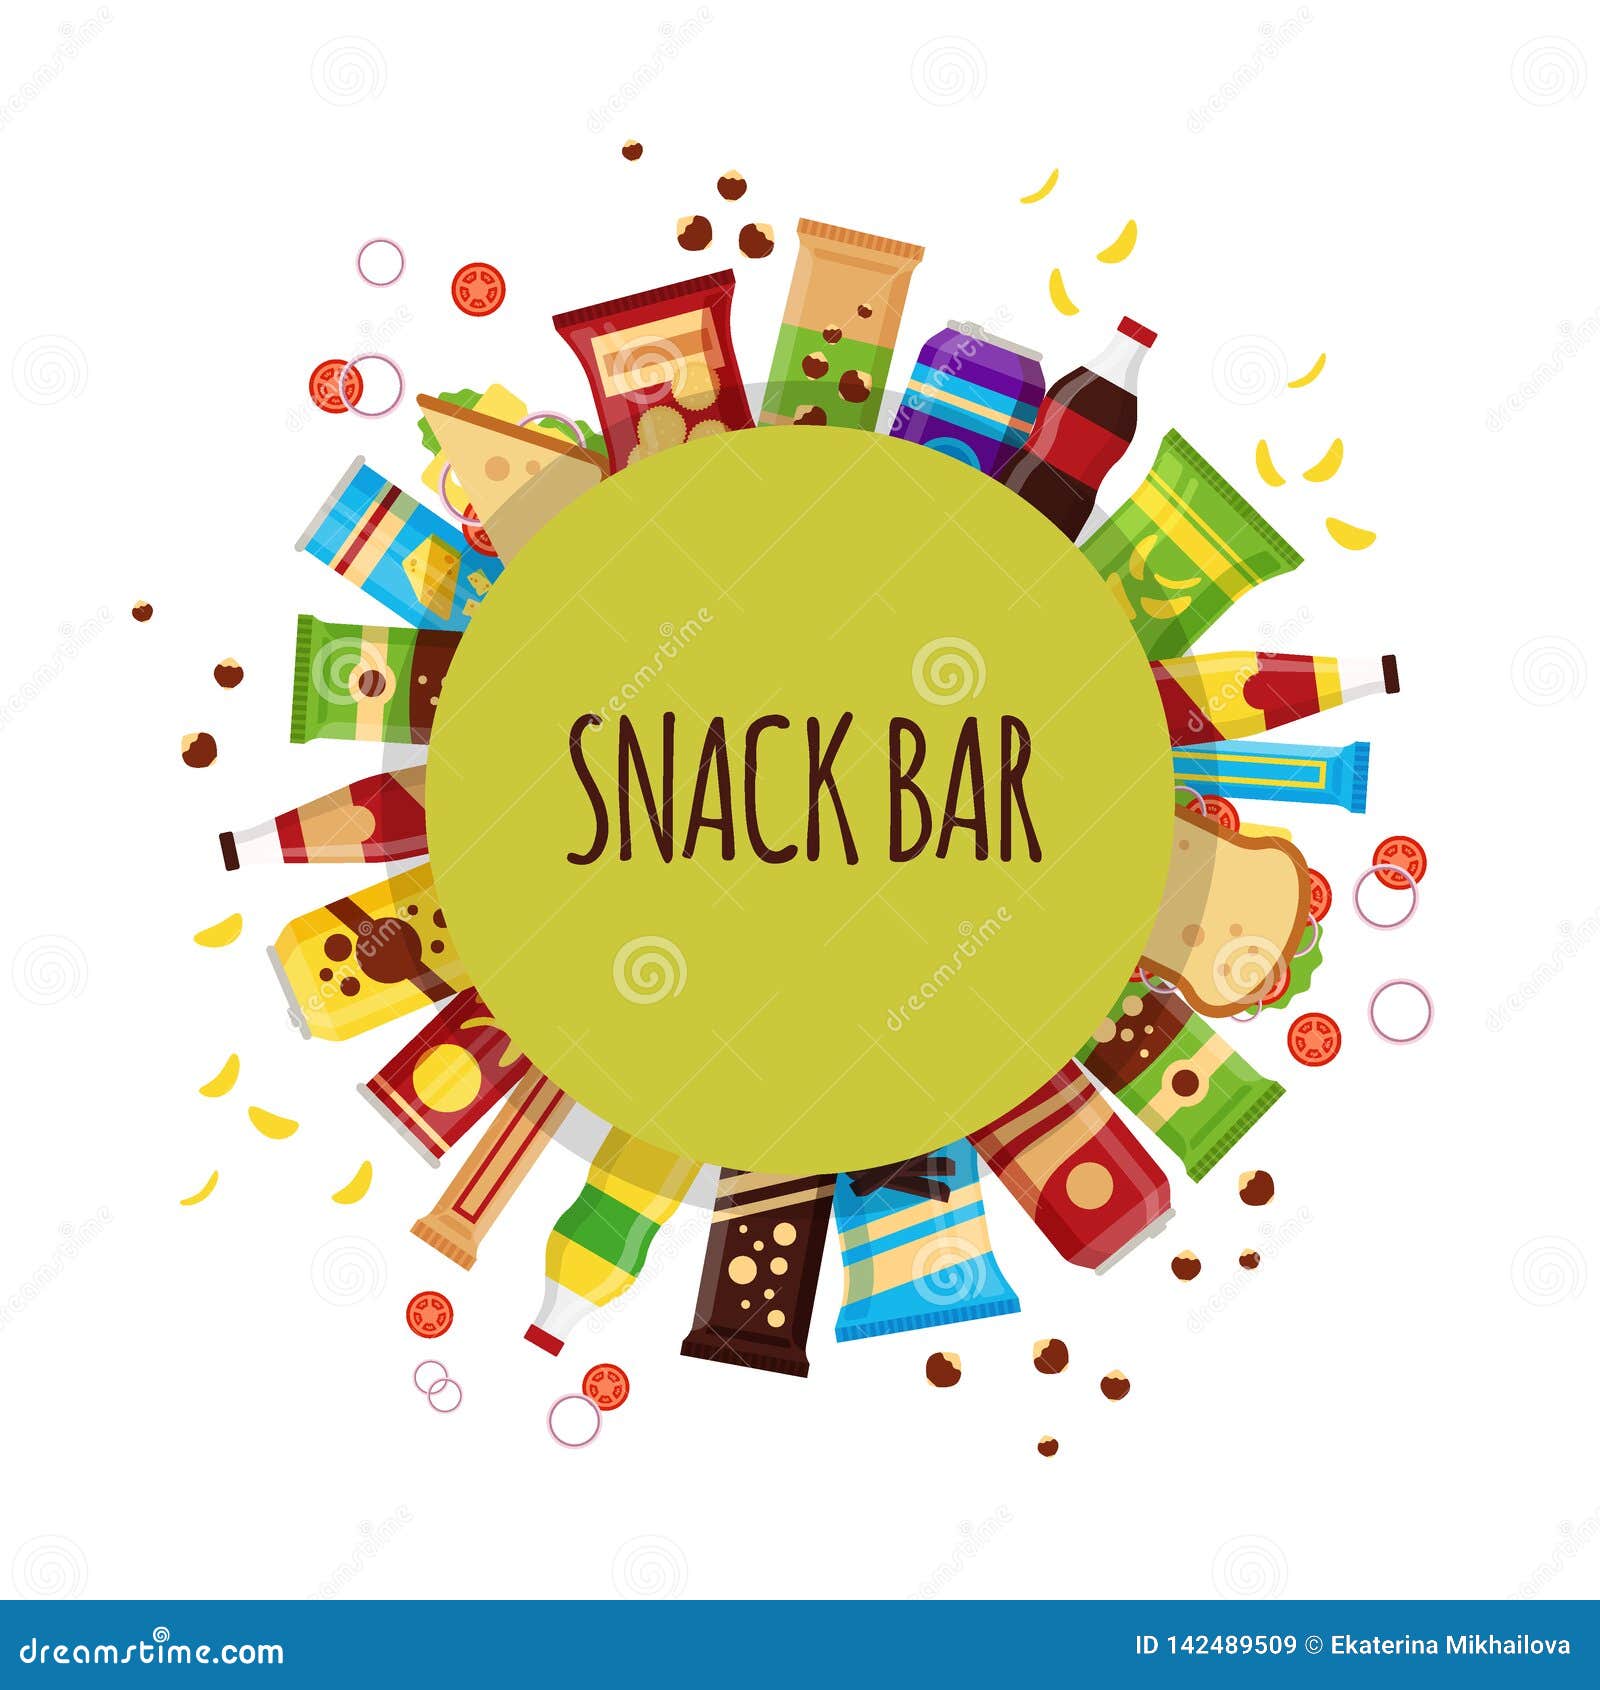 snack product with circle. fast food snacks, drinks, nuts, chips, cracker, juice, sandwich for snack bar  on